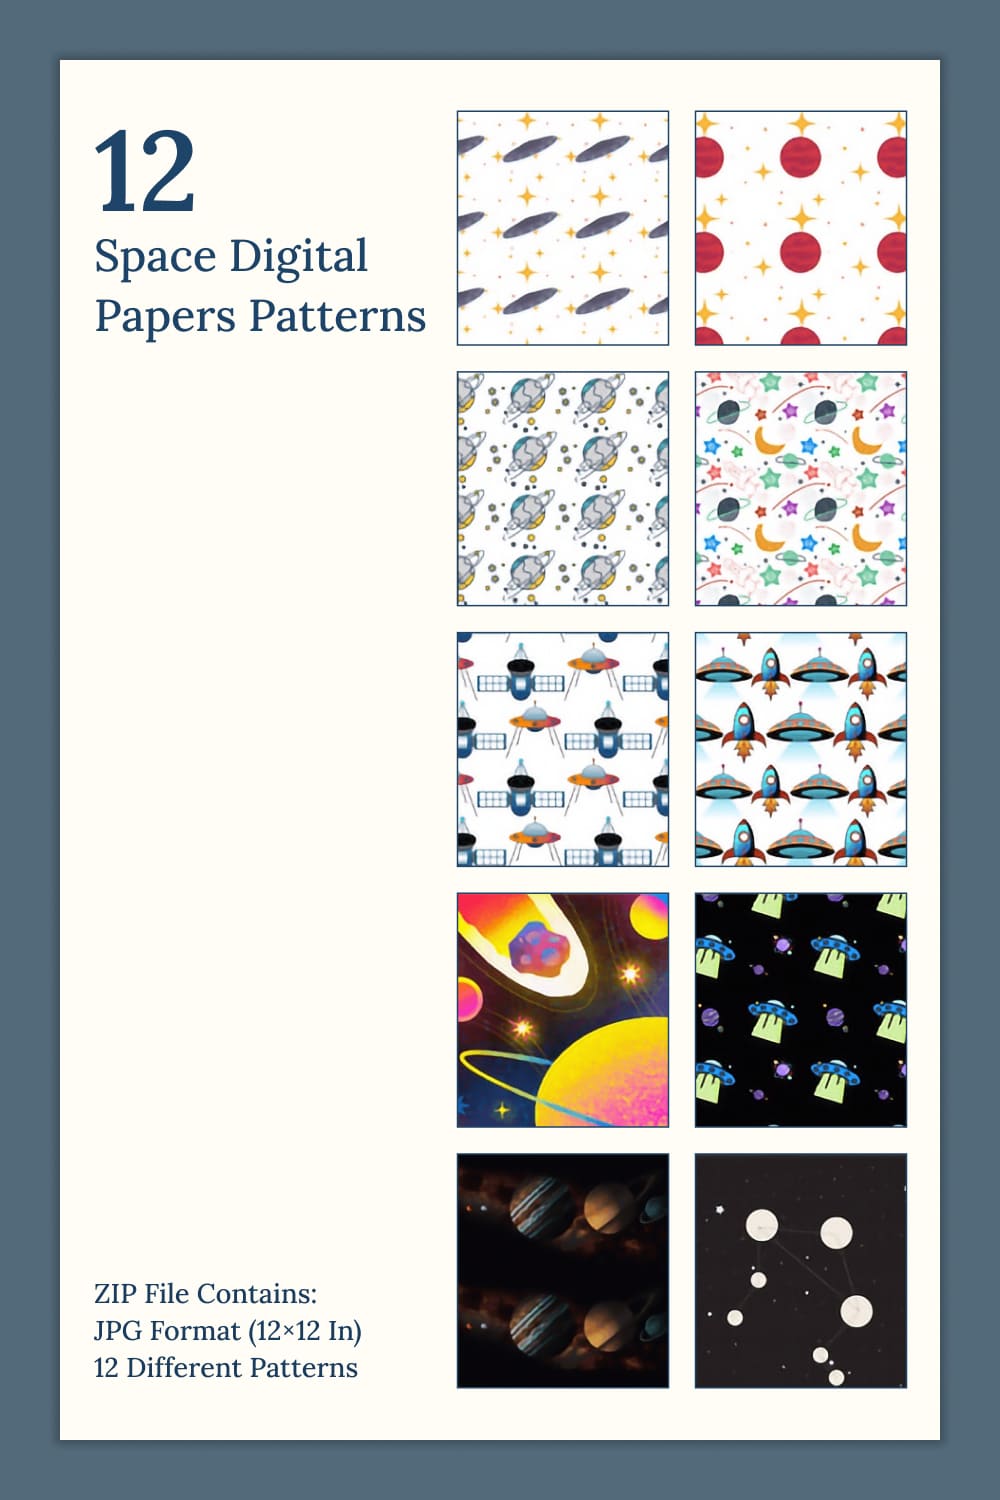 Fantastic images of space on paper patterns.